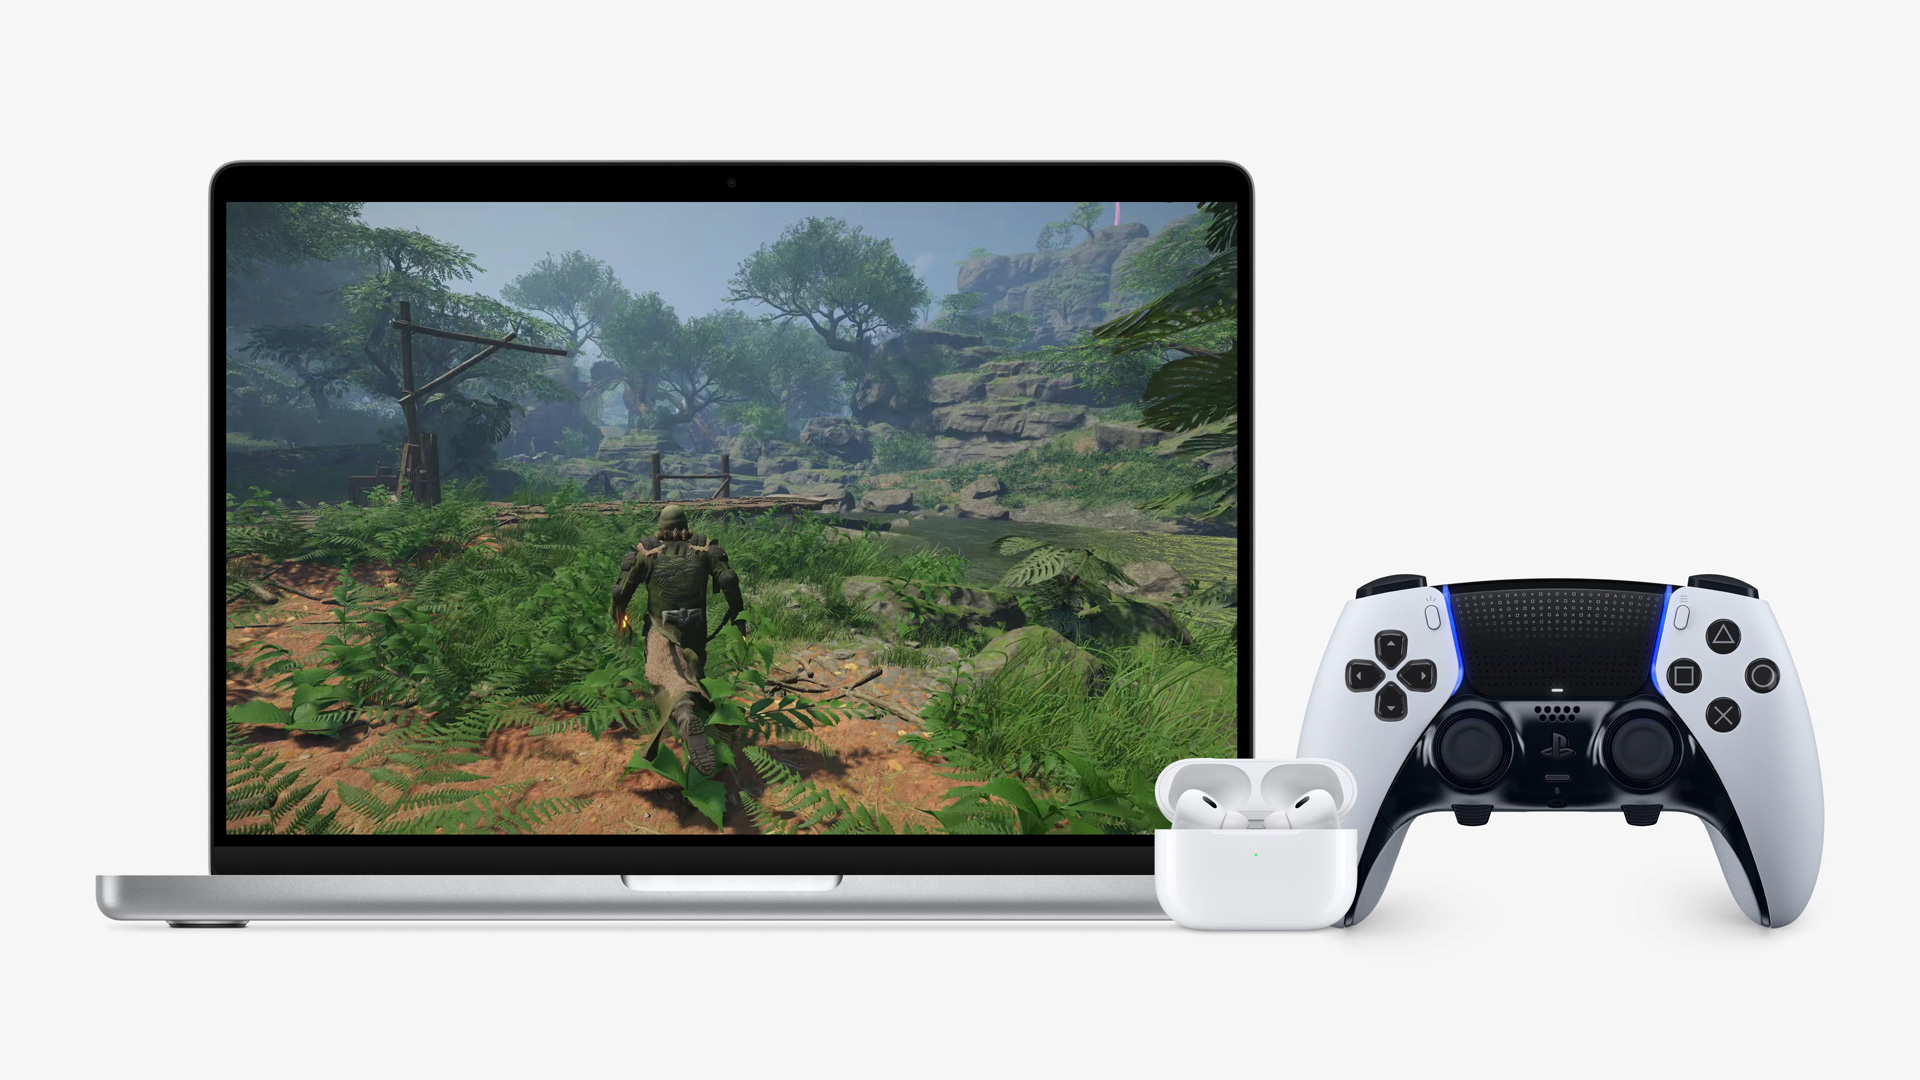 The new Game Mode provides an optimized experience with smoother frame rates and lower latency on devices connected via Bluetooth.